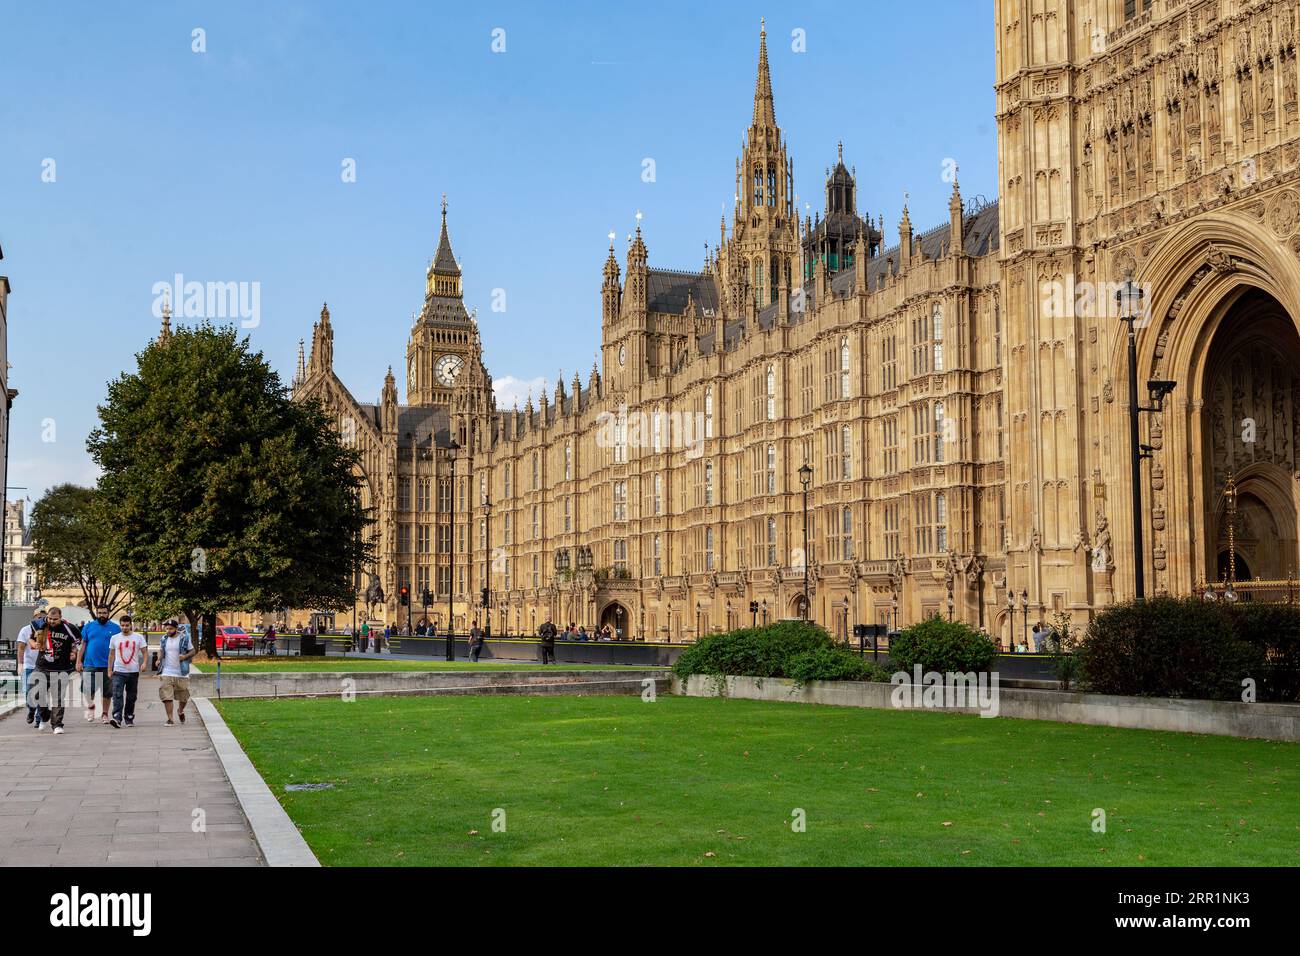 LONDON, GREAT BRITAIN - SEPTEMBER 7, 2014: This is a view of the Westminster Palace building from the Abingdon Street Gardens. Stock Photo